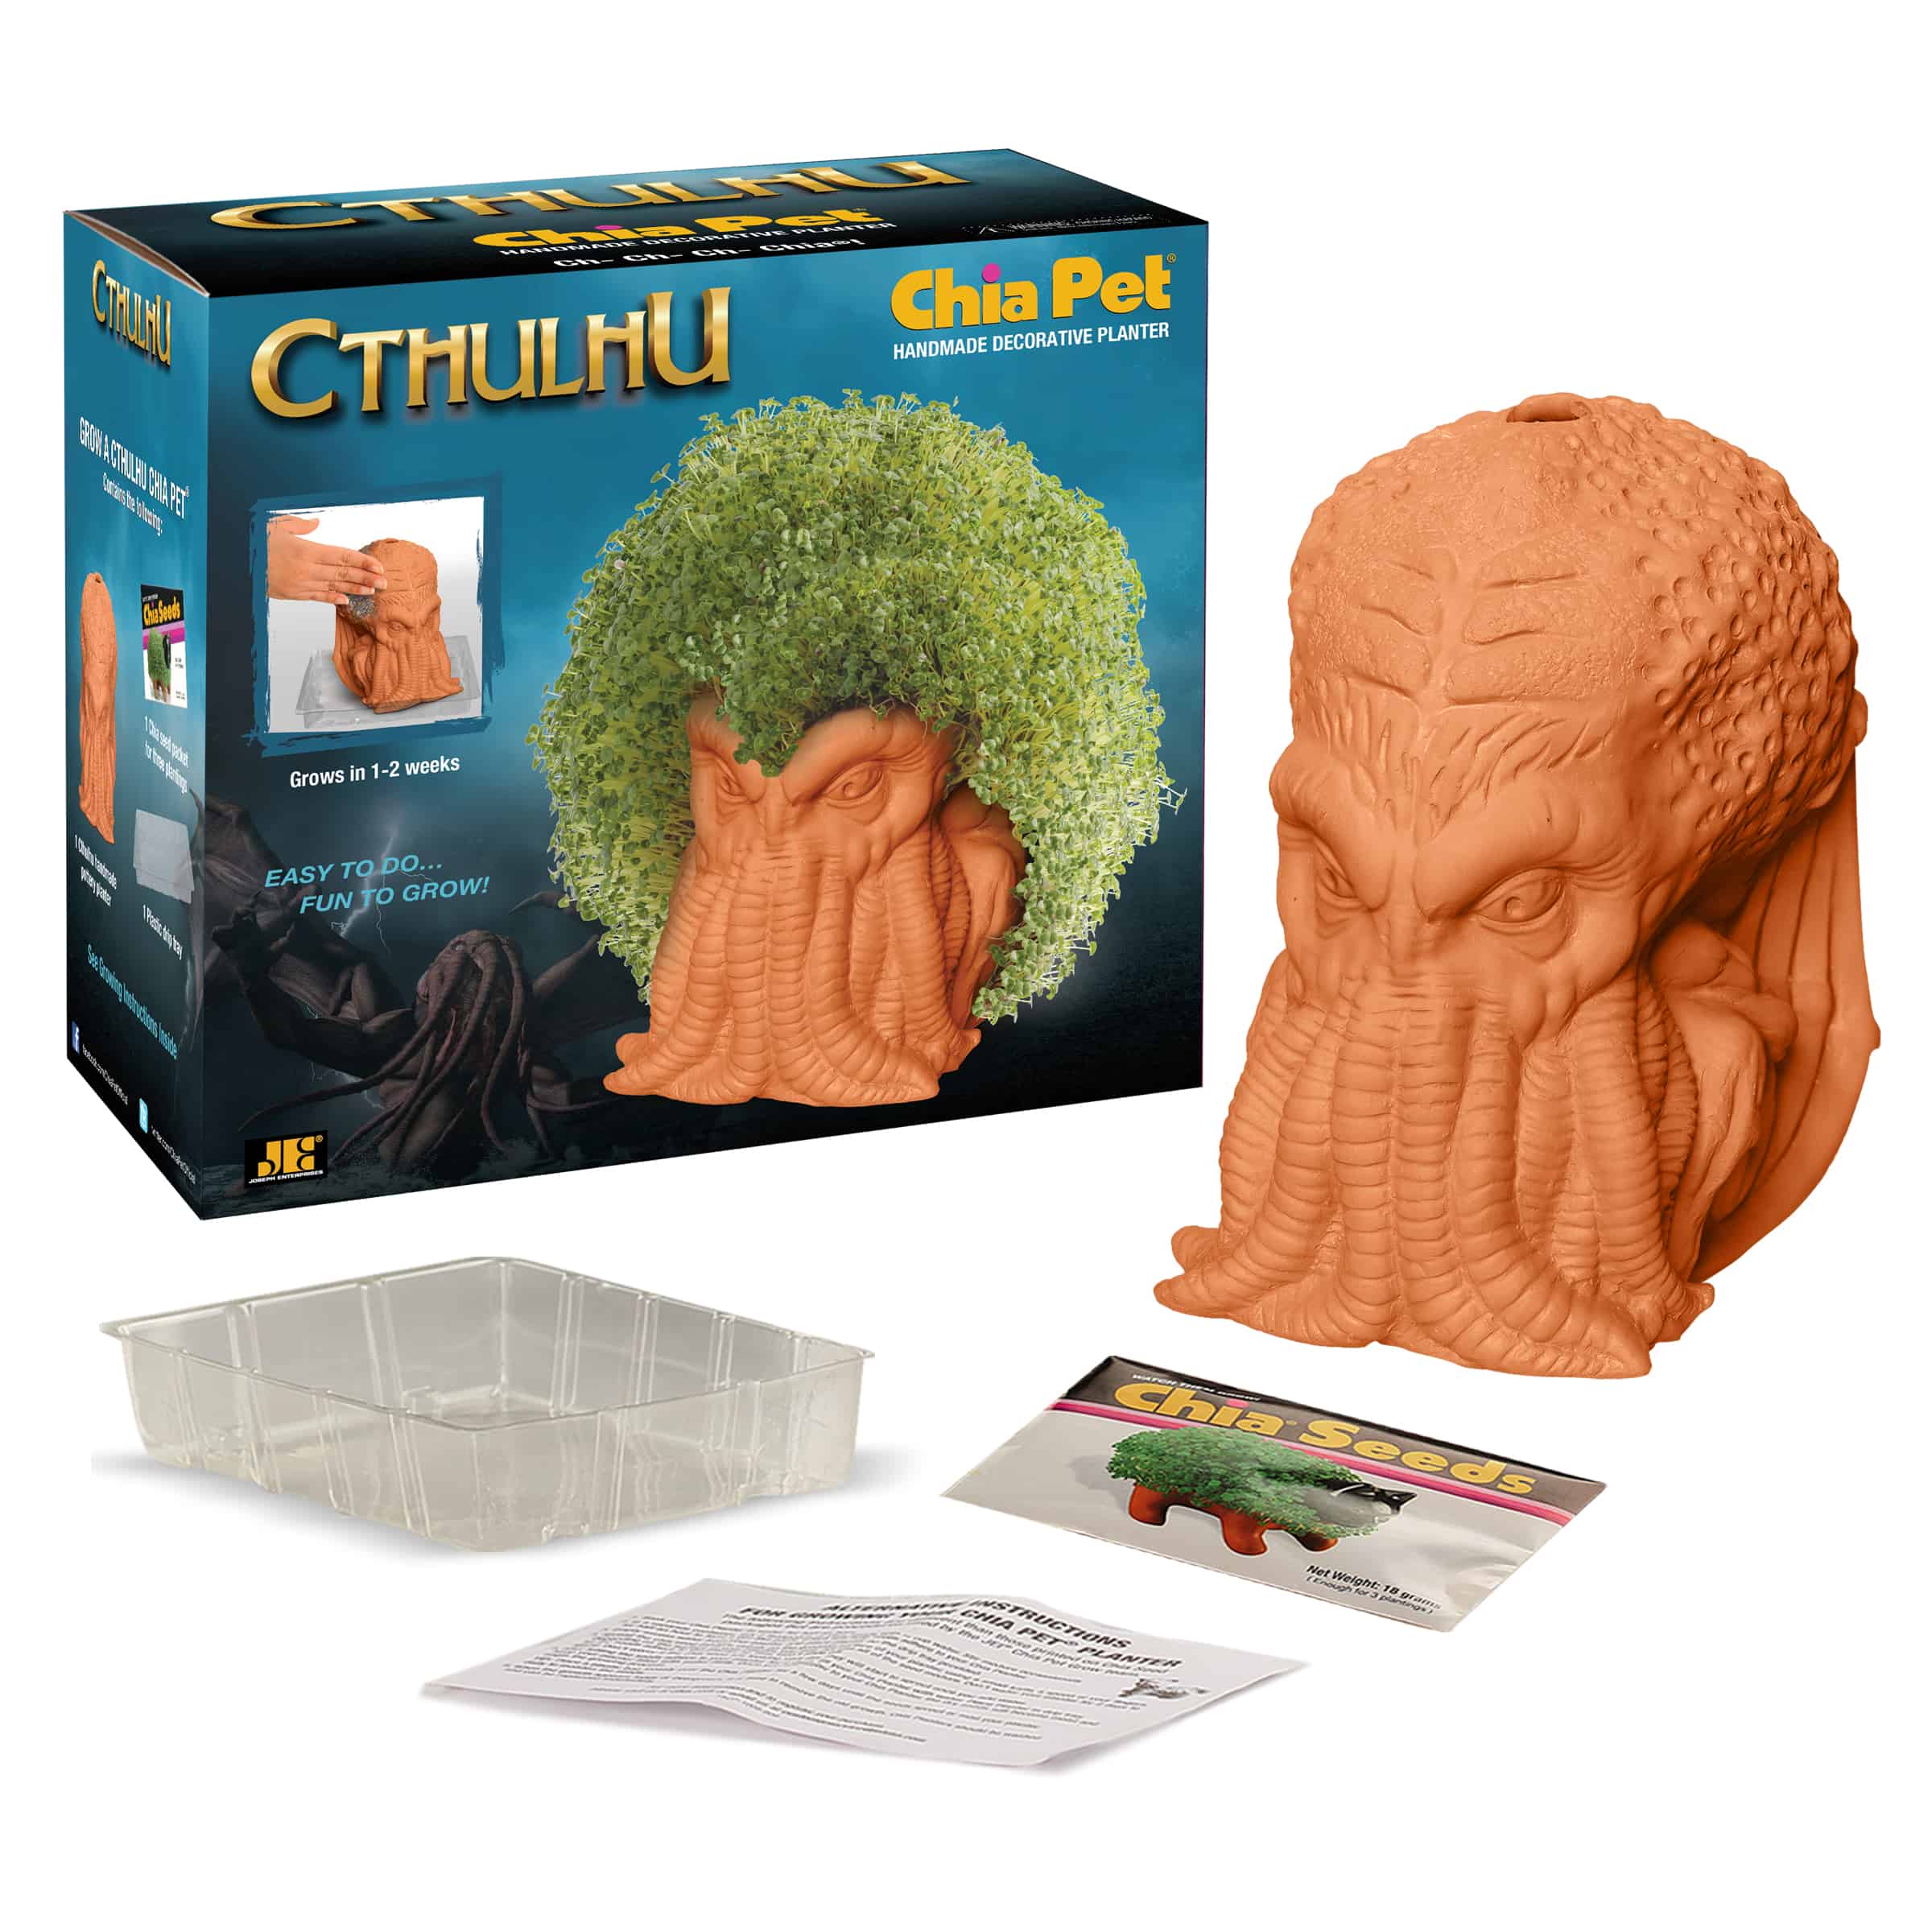 The Cthulhu Chia Pet is here in time for Thanksgiving 2022! 40